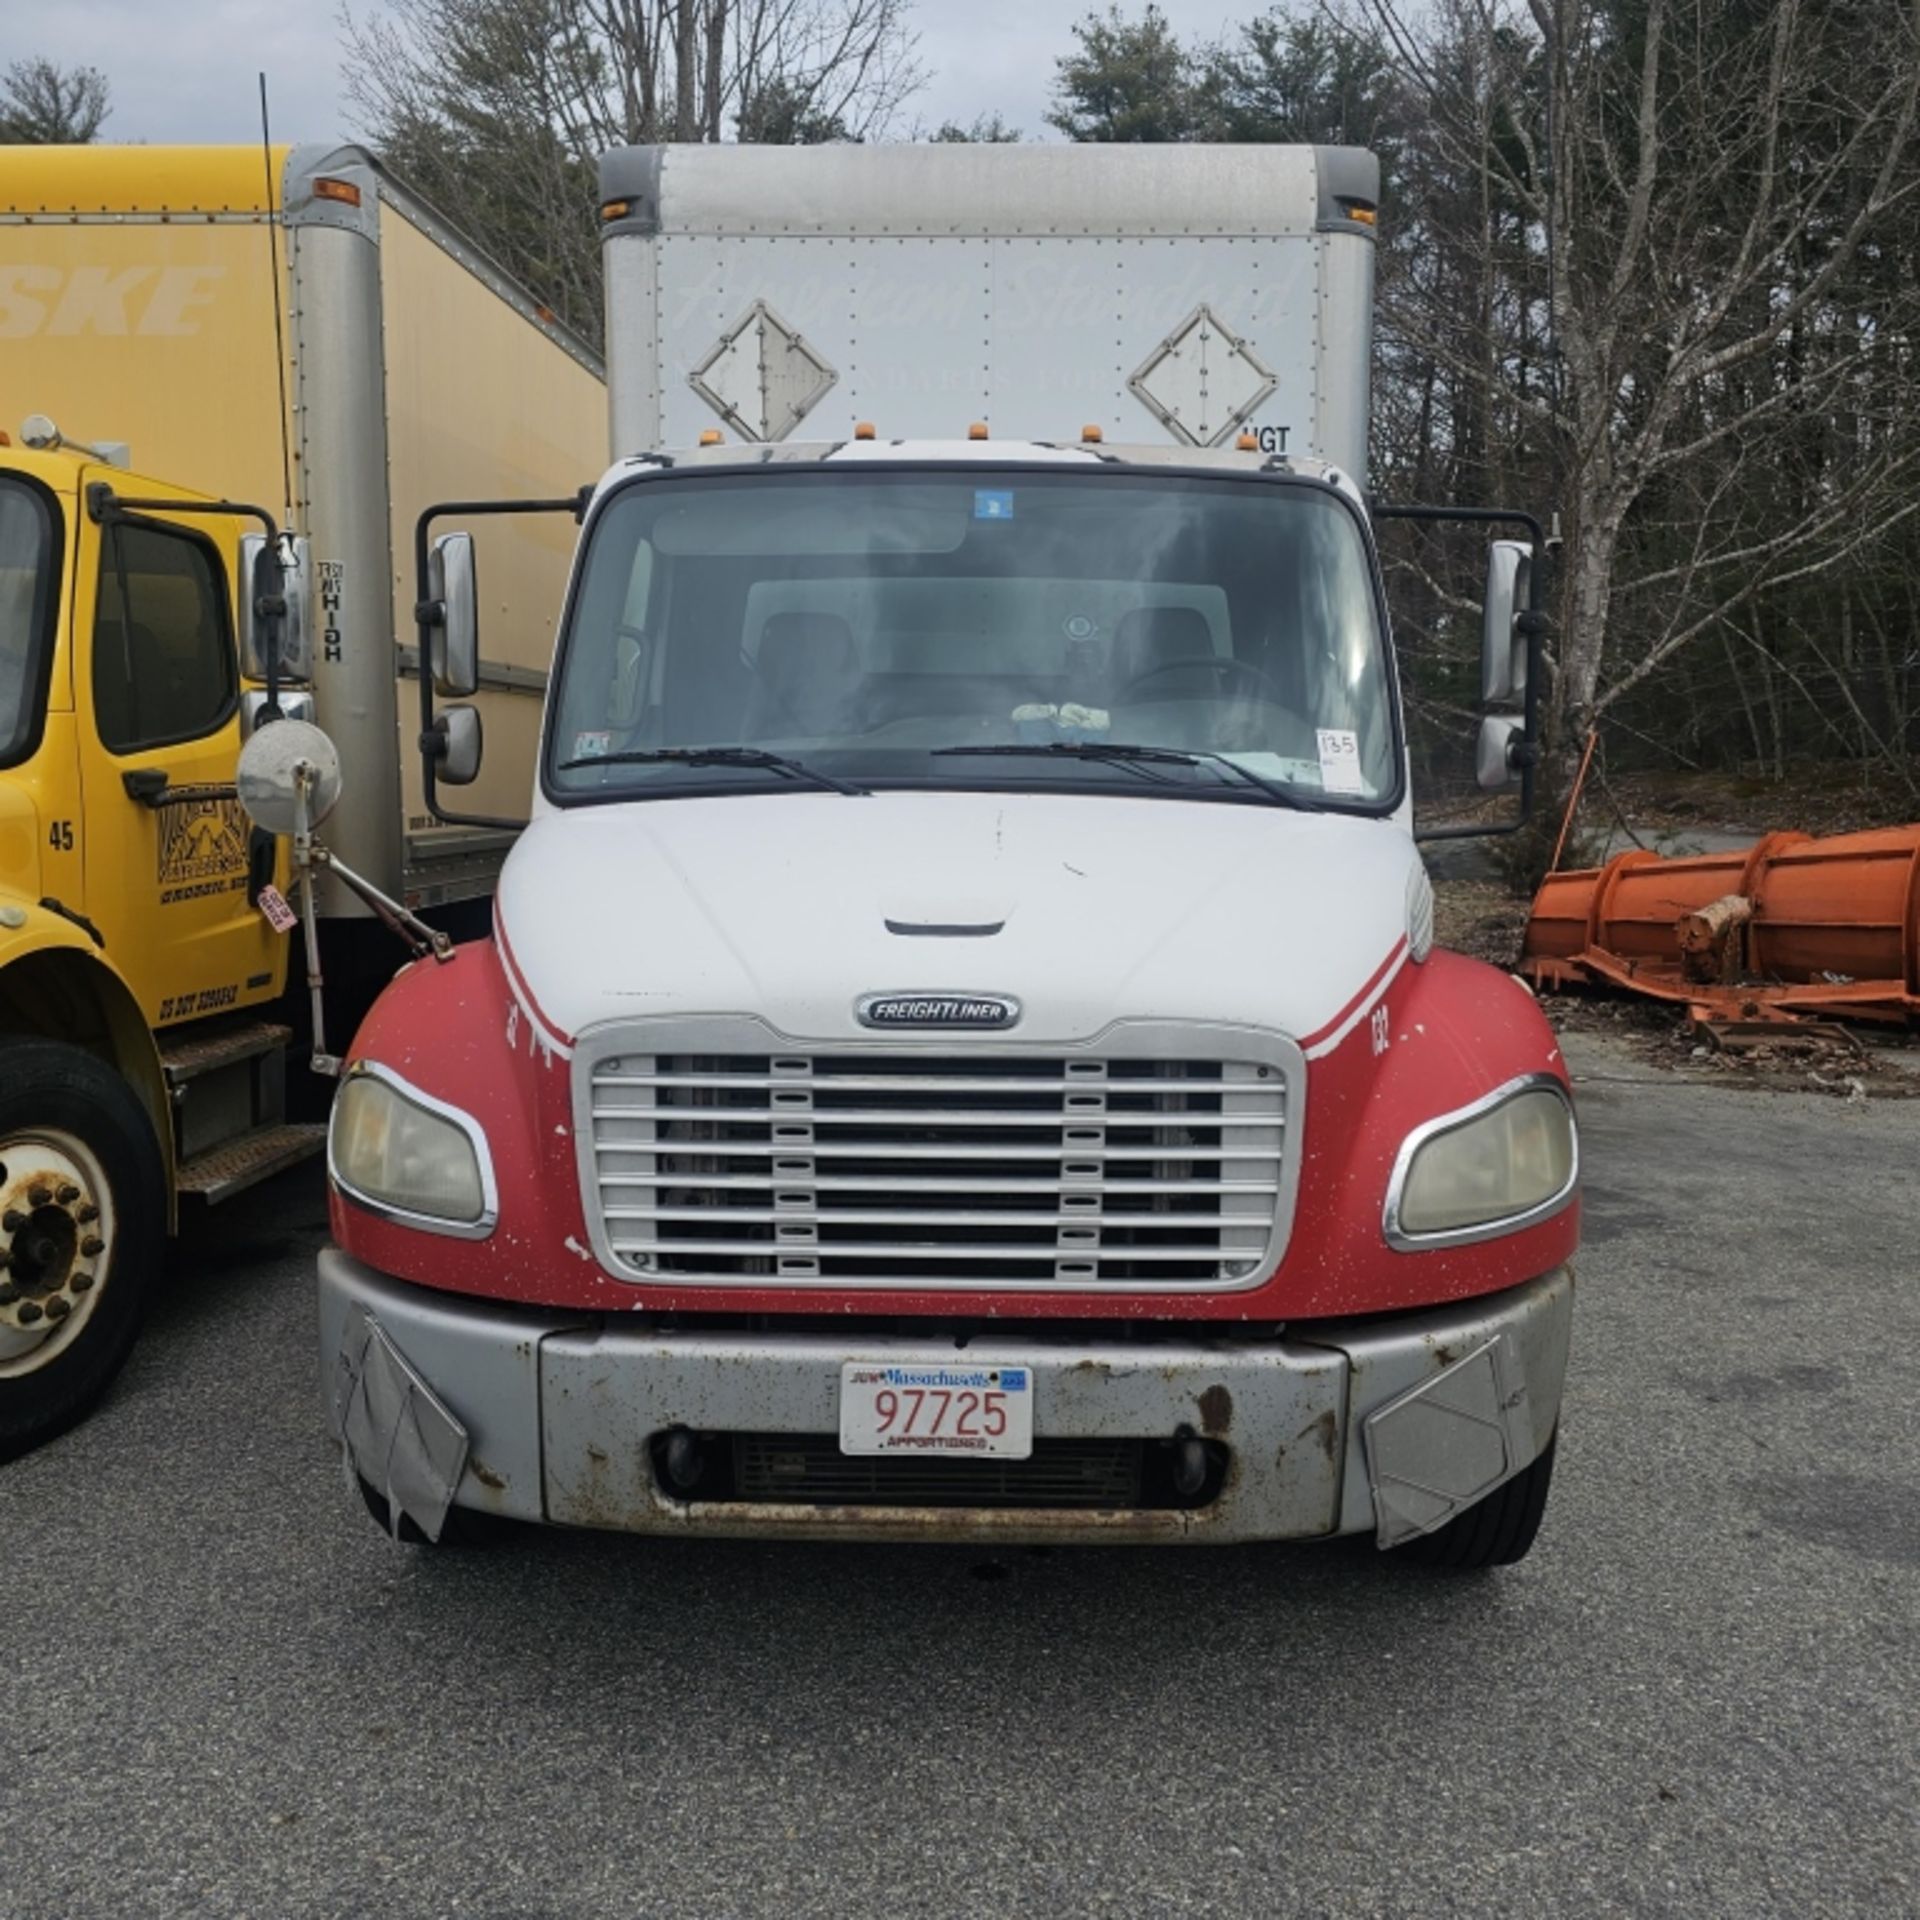 2005 Freightliner Box Truck - Image 2 of 11